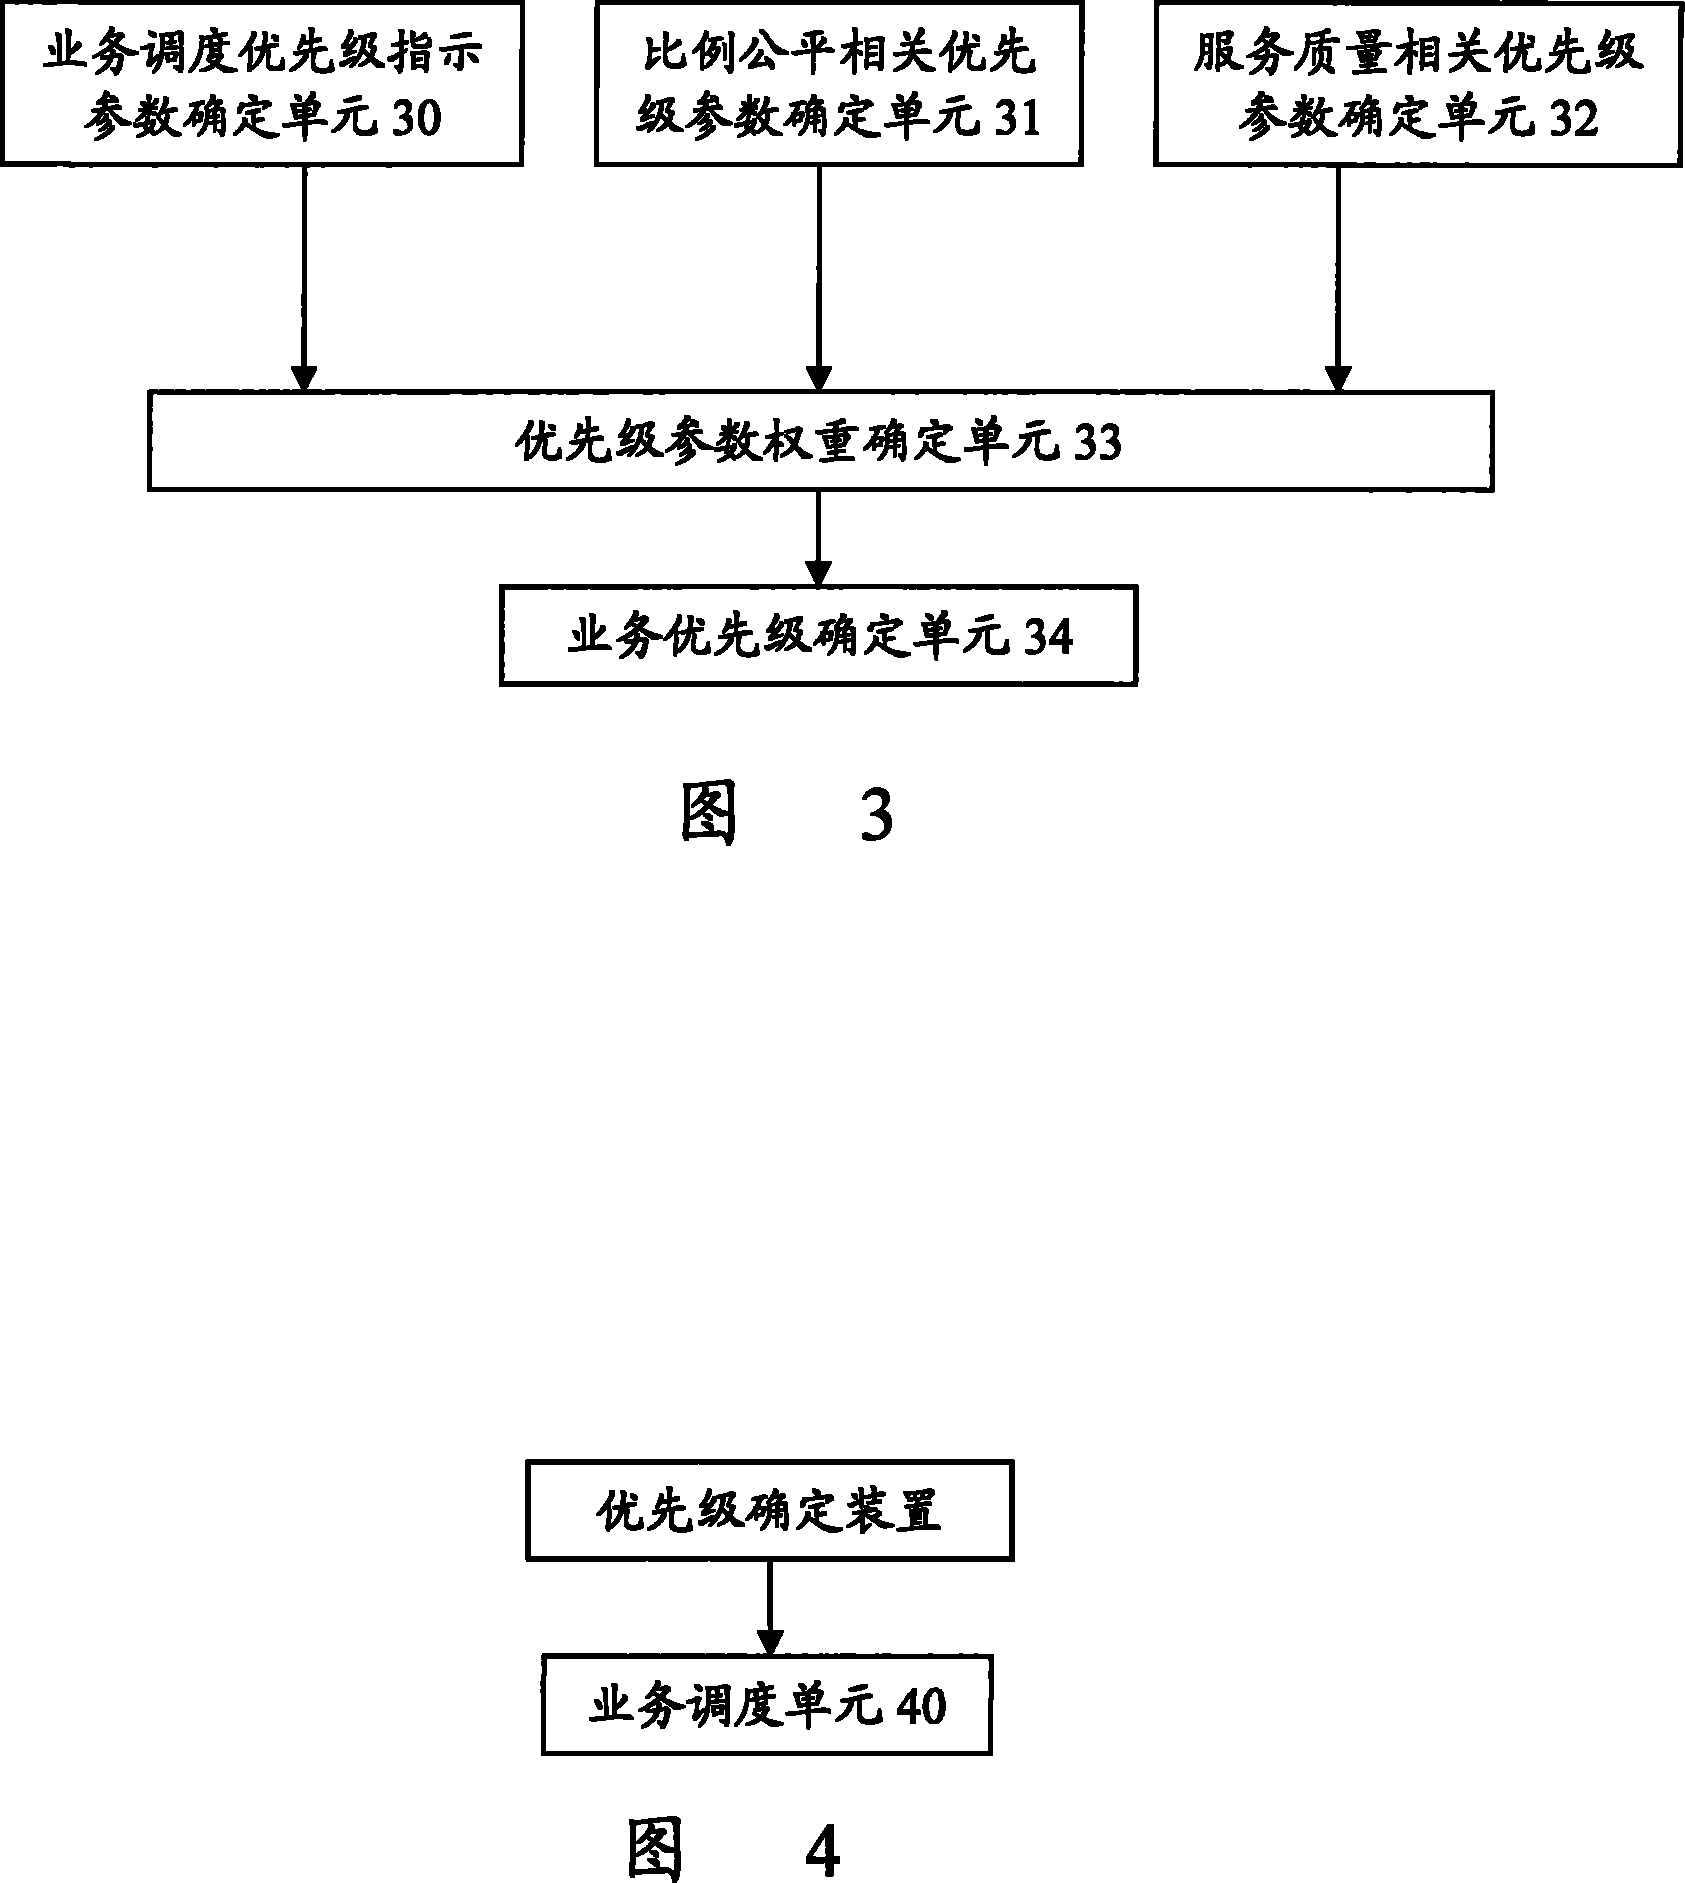 Method and apparatus for determining business priority level as well as scheduling method and apparatus